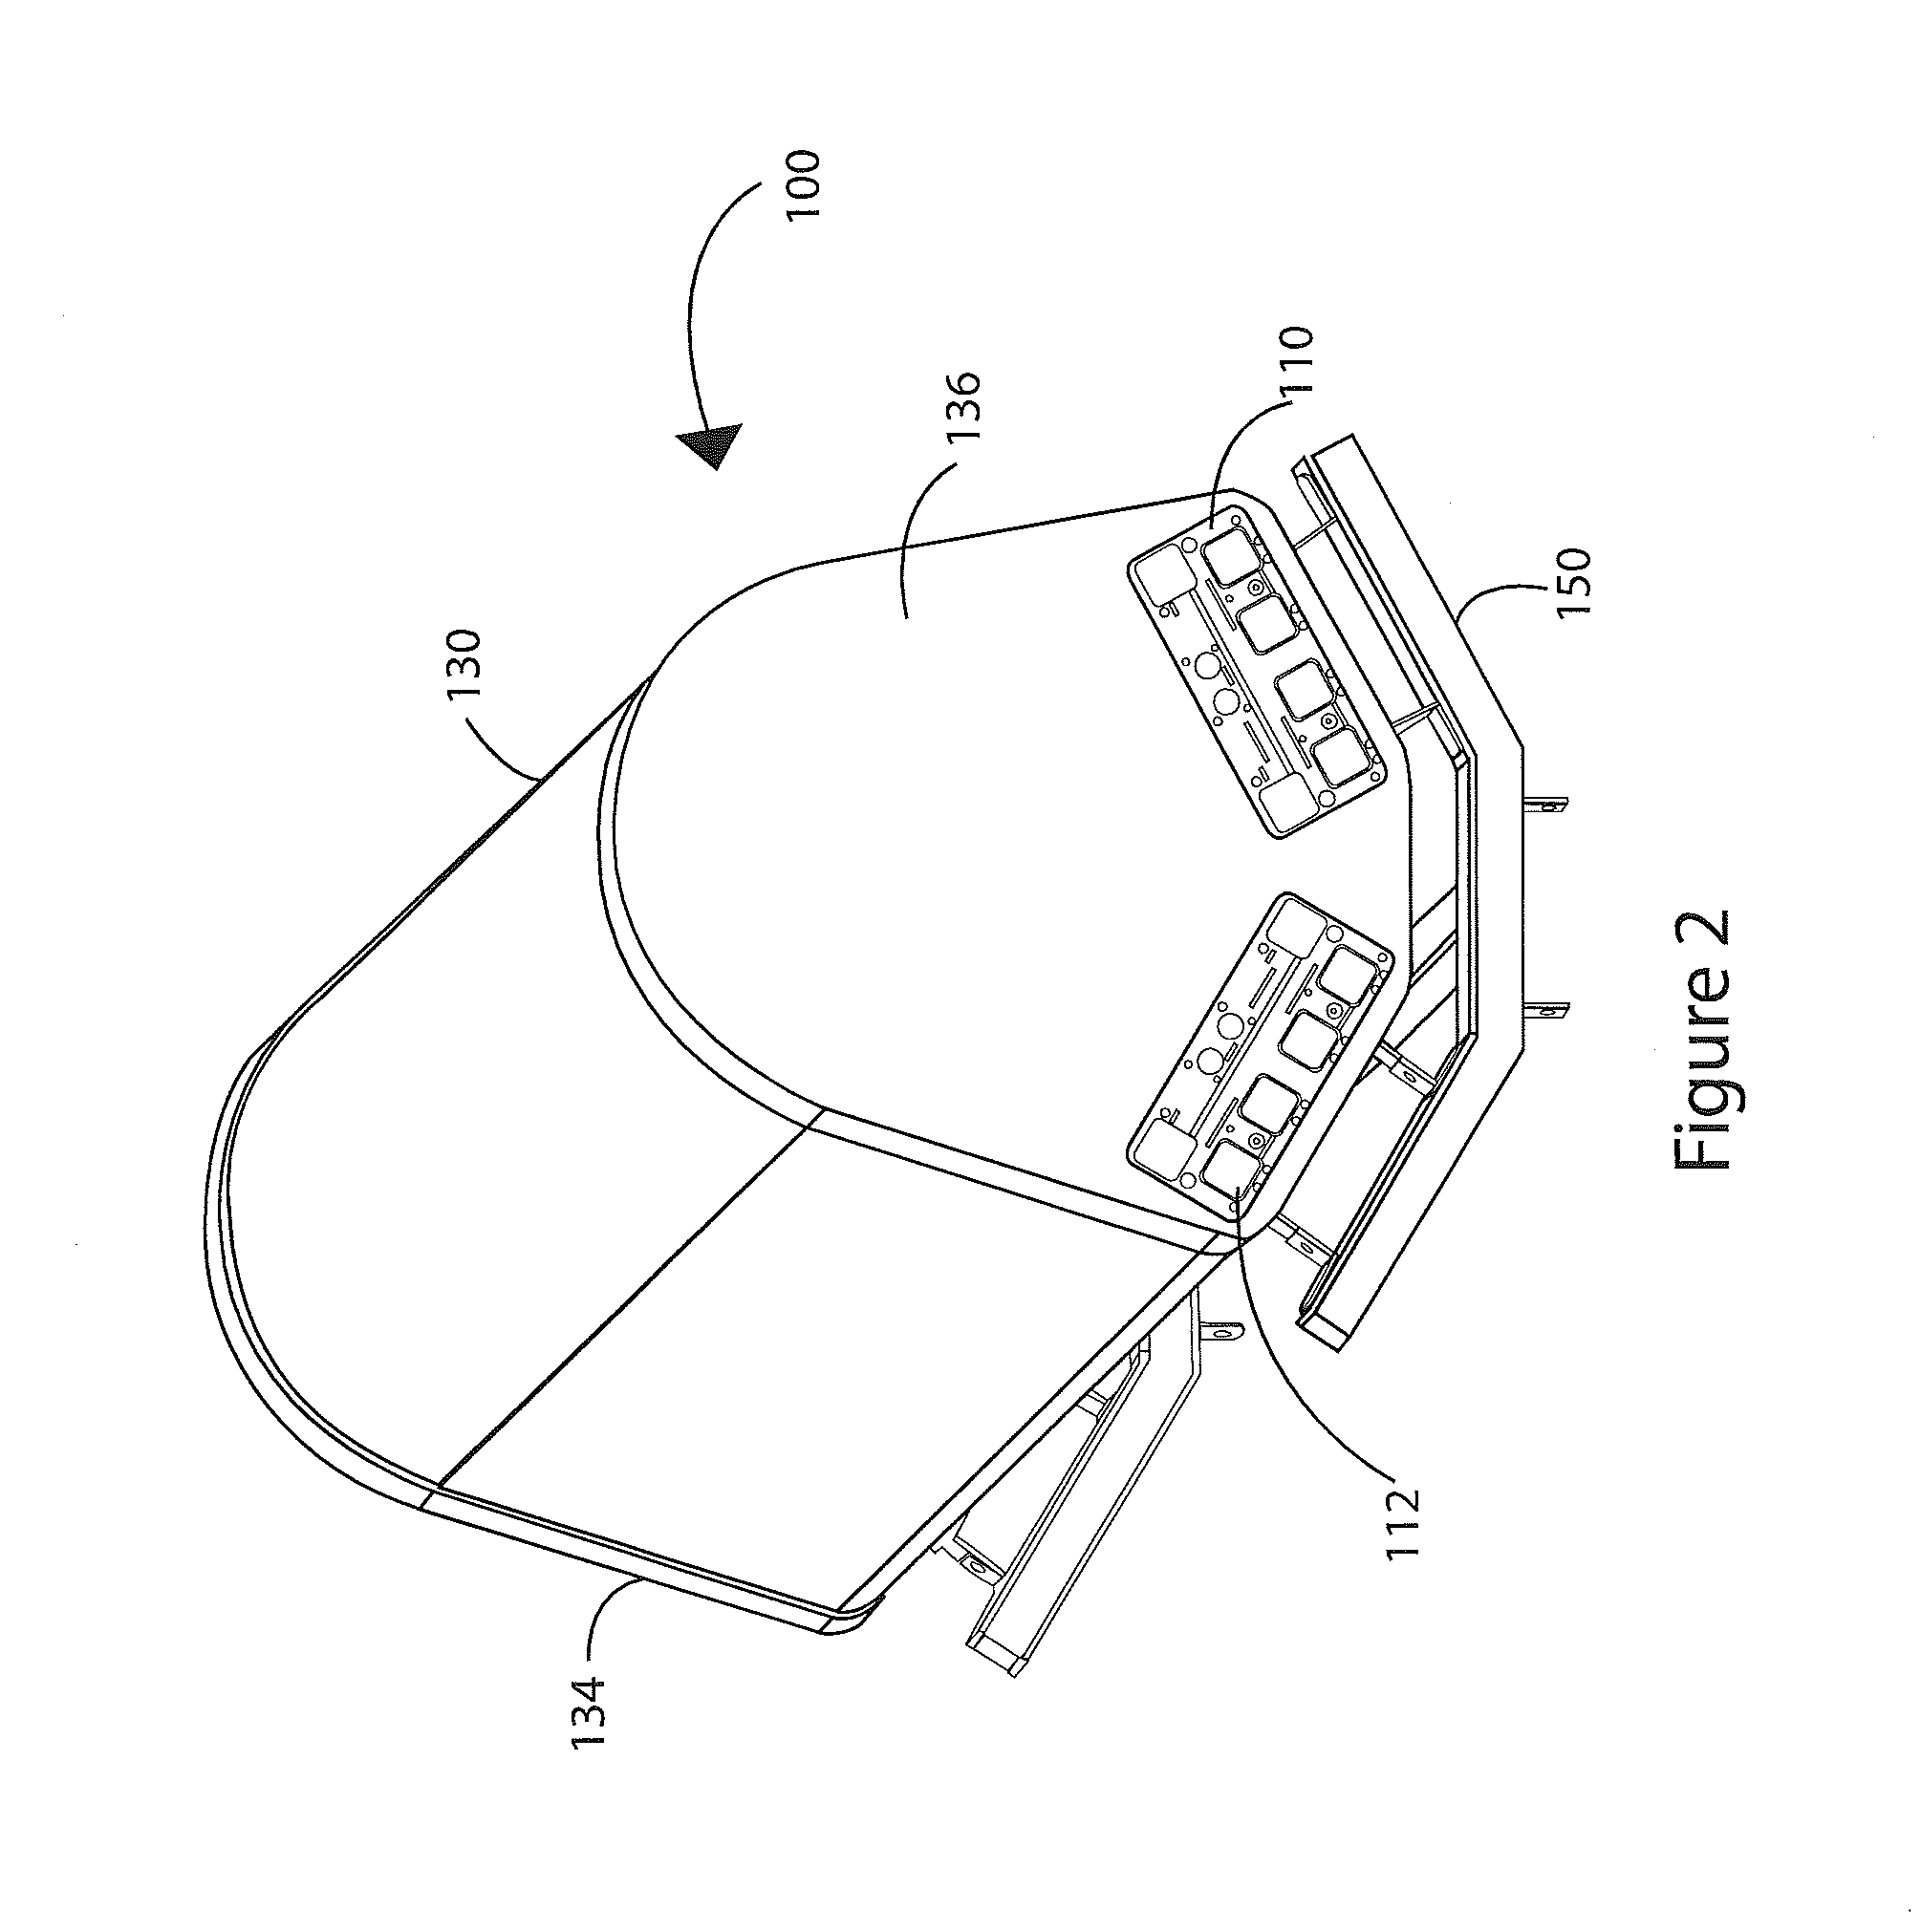 Multi-beam antenna with modular luneburg lens and method of lens manufacture